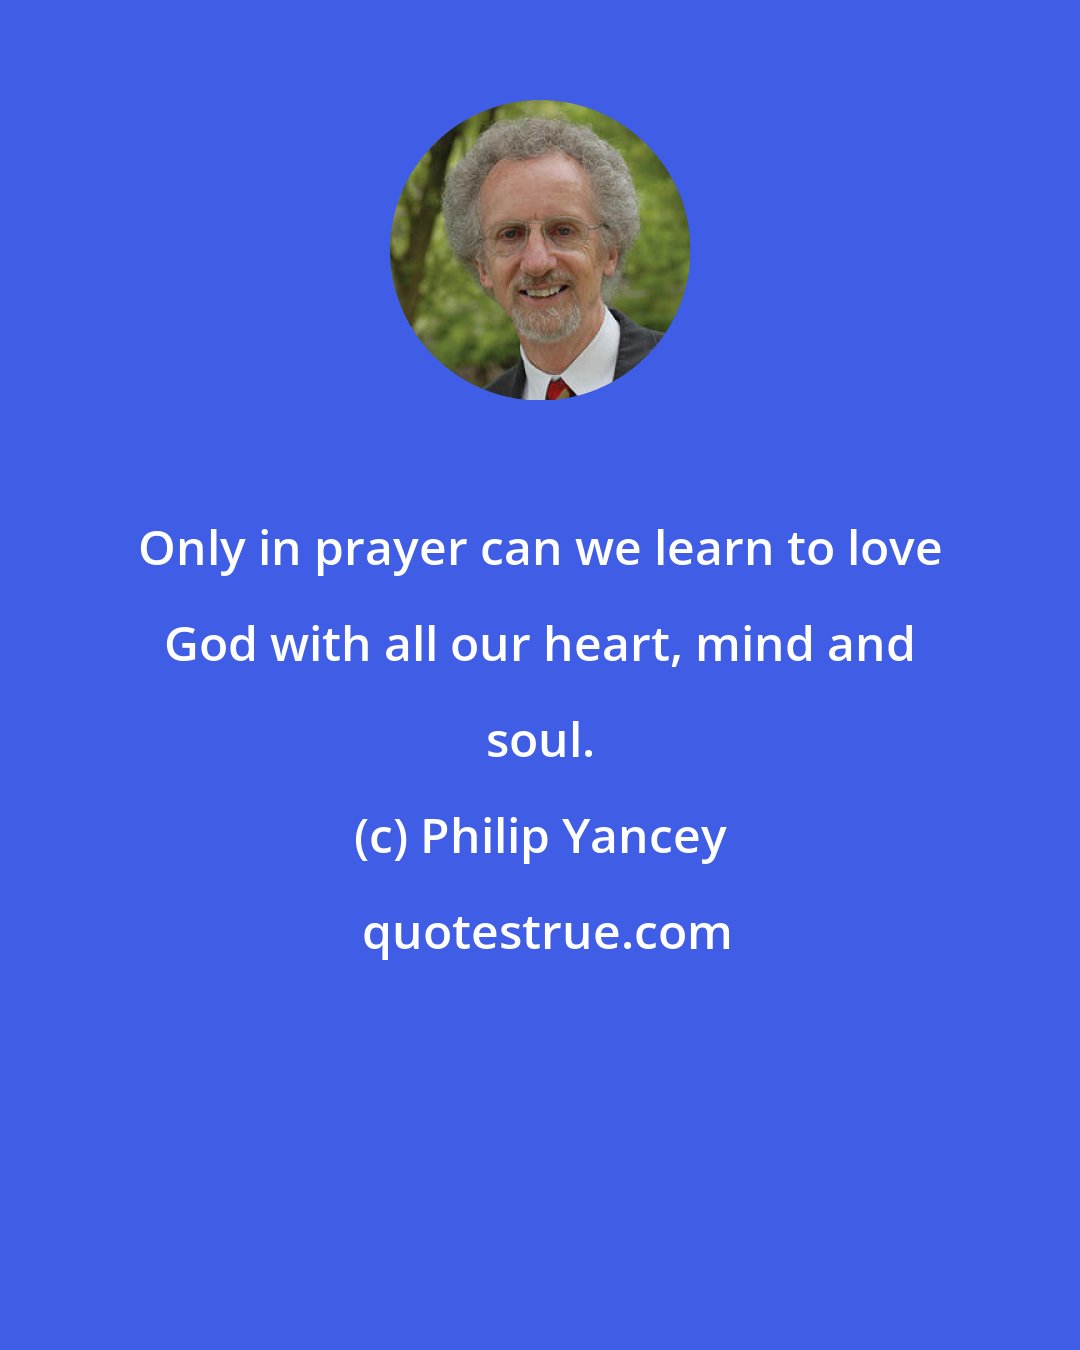 Philip Yancey: Only in prayer can we learn to love God with all our heart, mind and soul.